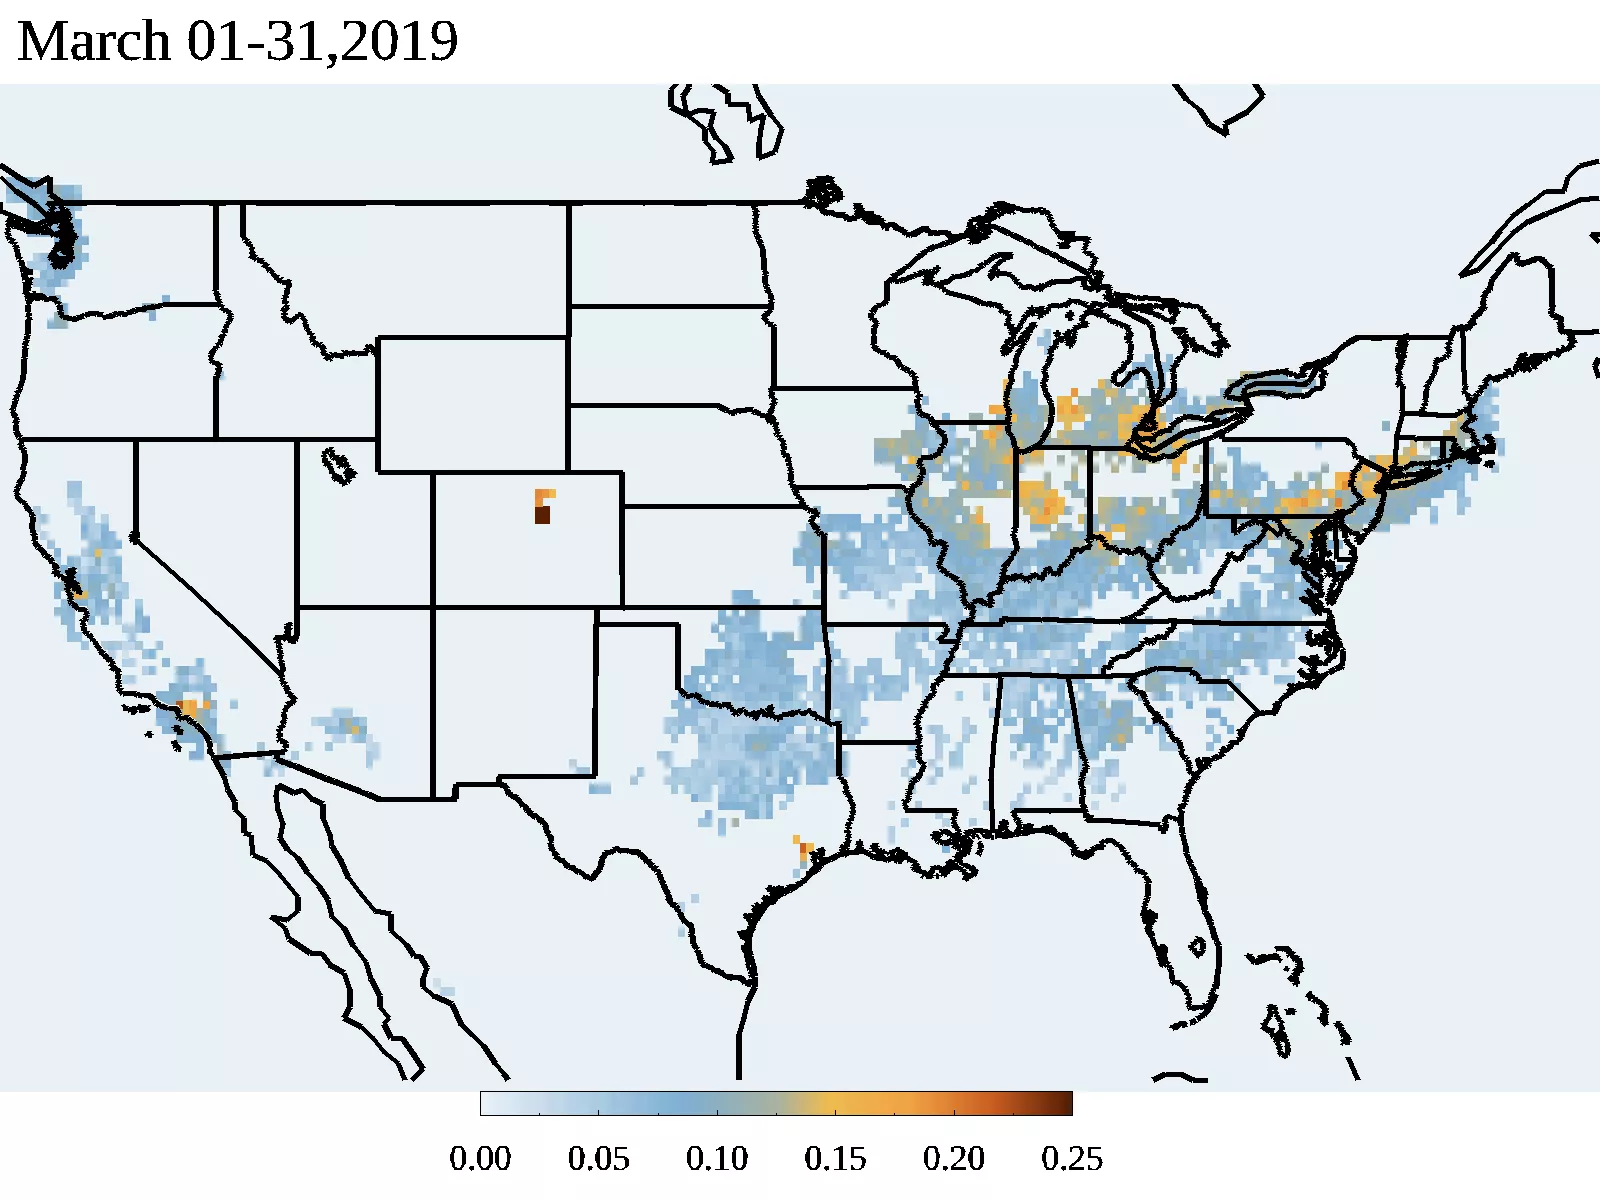 Airborne particle pollution over the US in March 2019, seen in shaes of blue to deep orange; the highest levels are over the Mid-Atlantic, the Great Lakes region, Denver, and LA